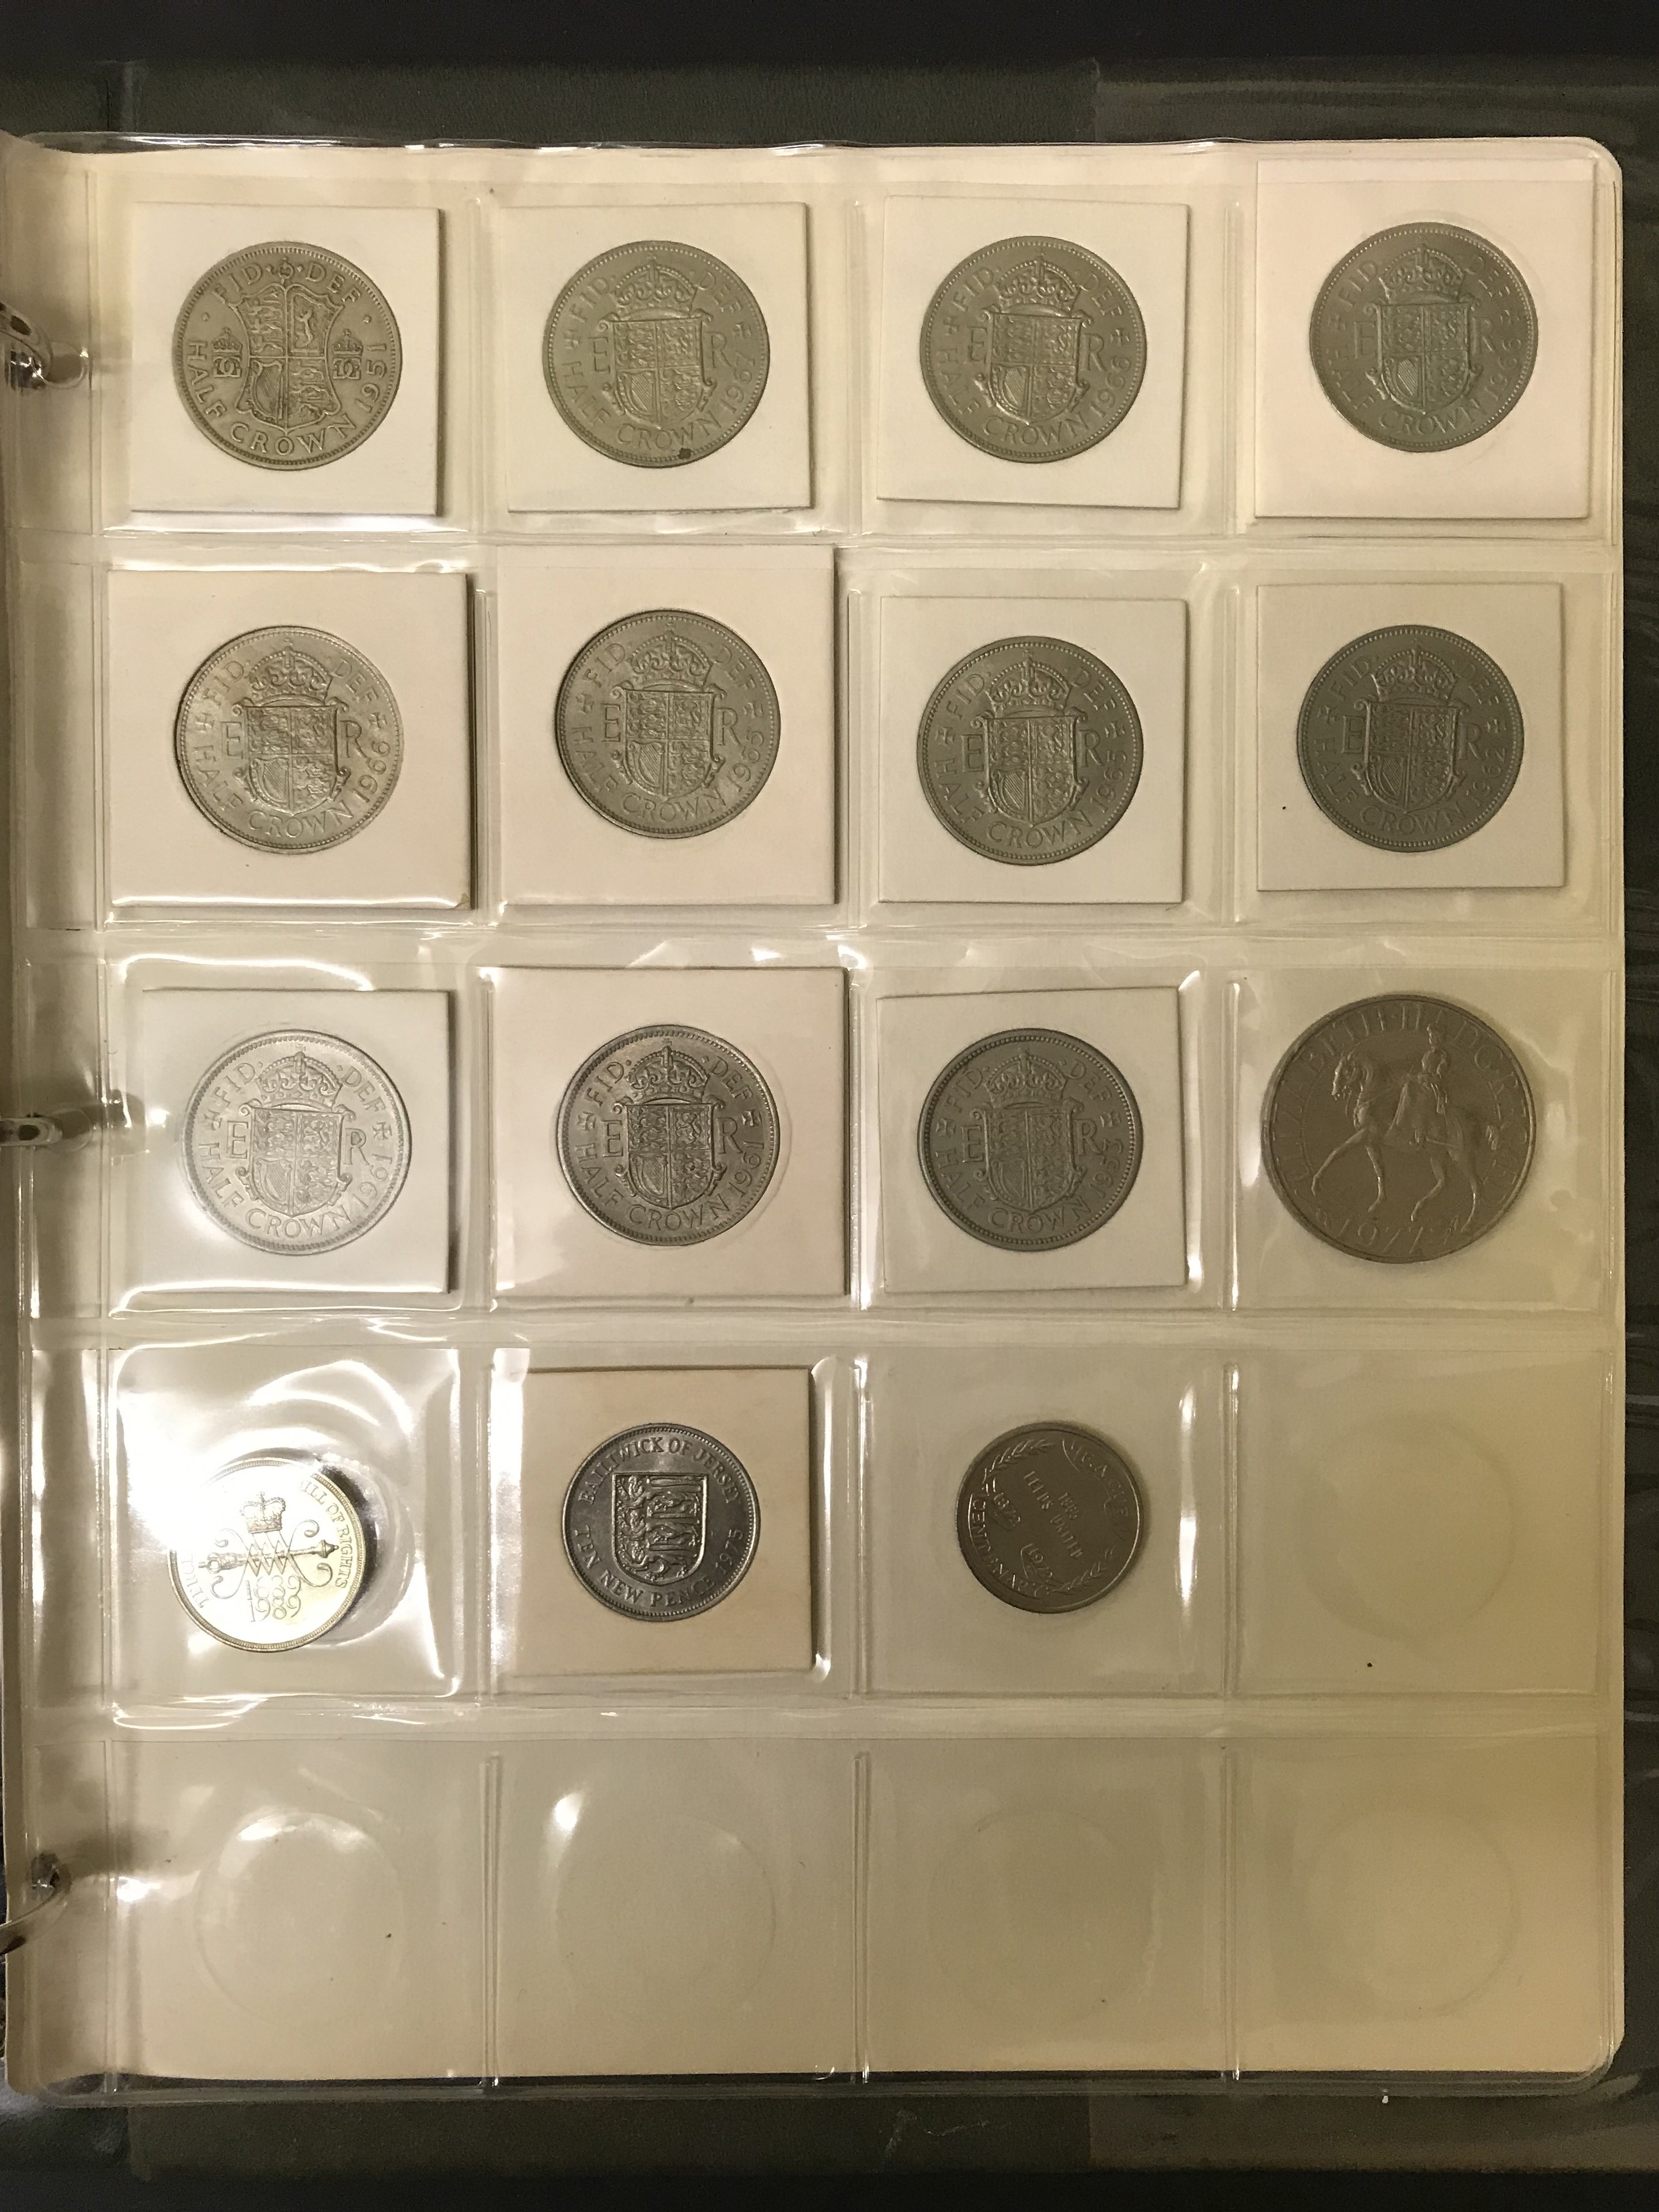 5 albums of coins including silver - Image 44 of 44